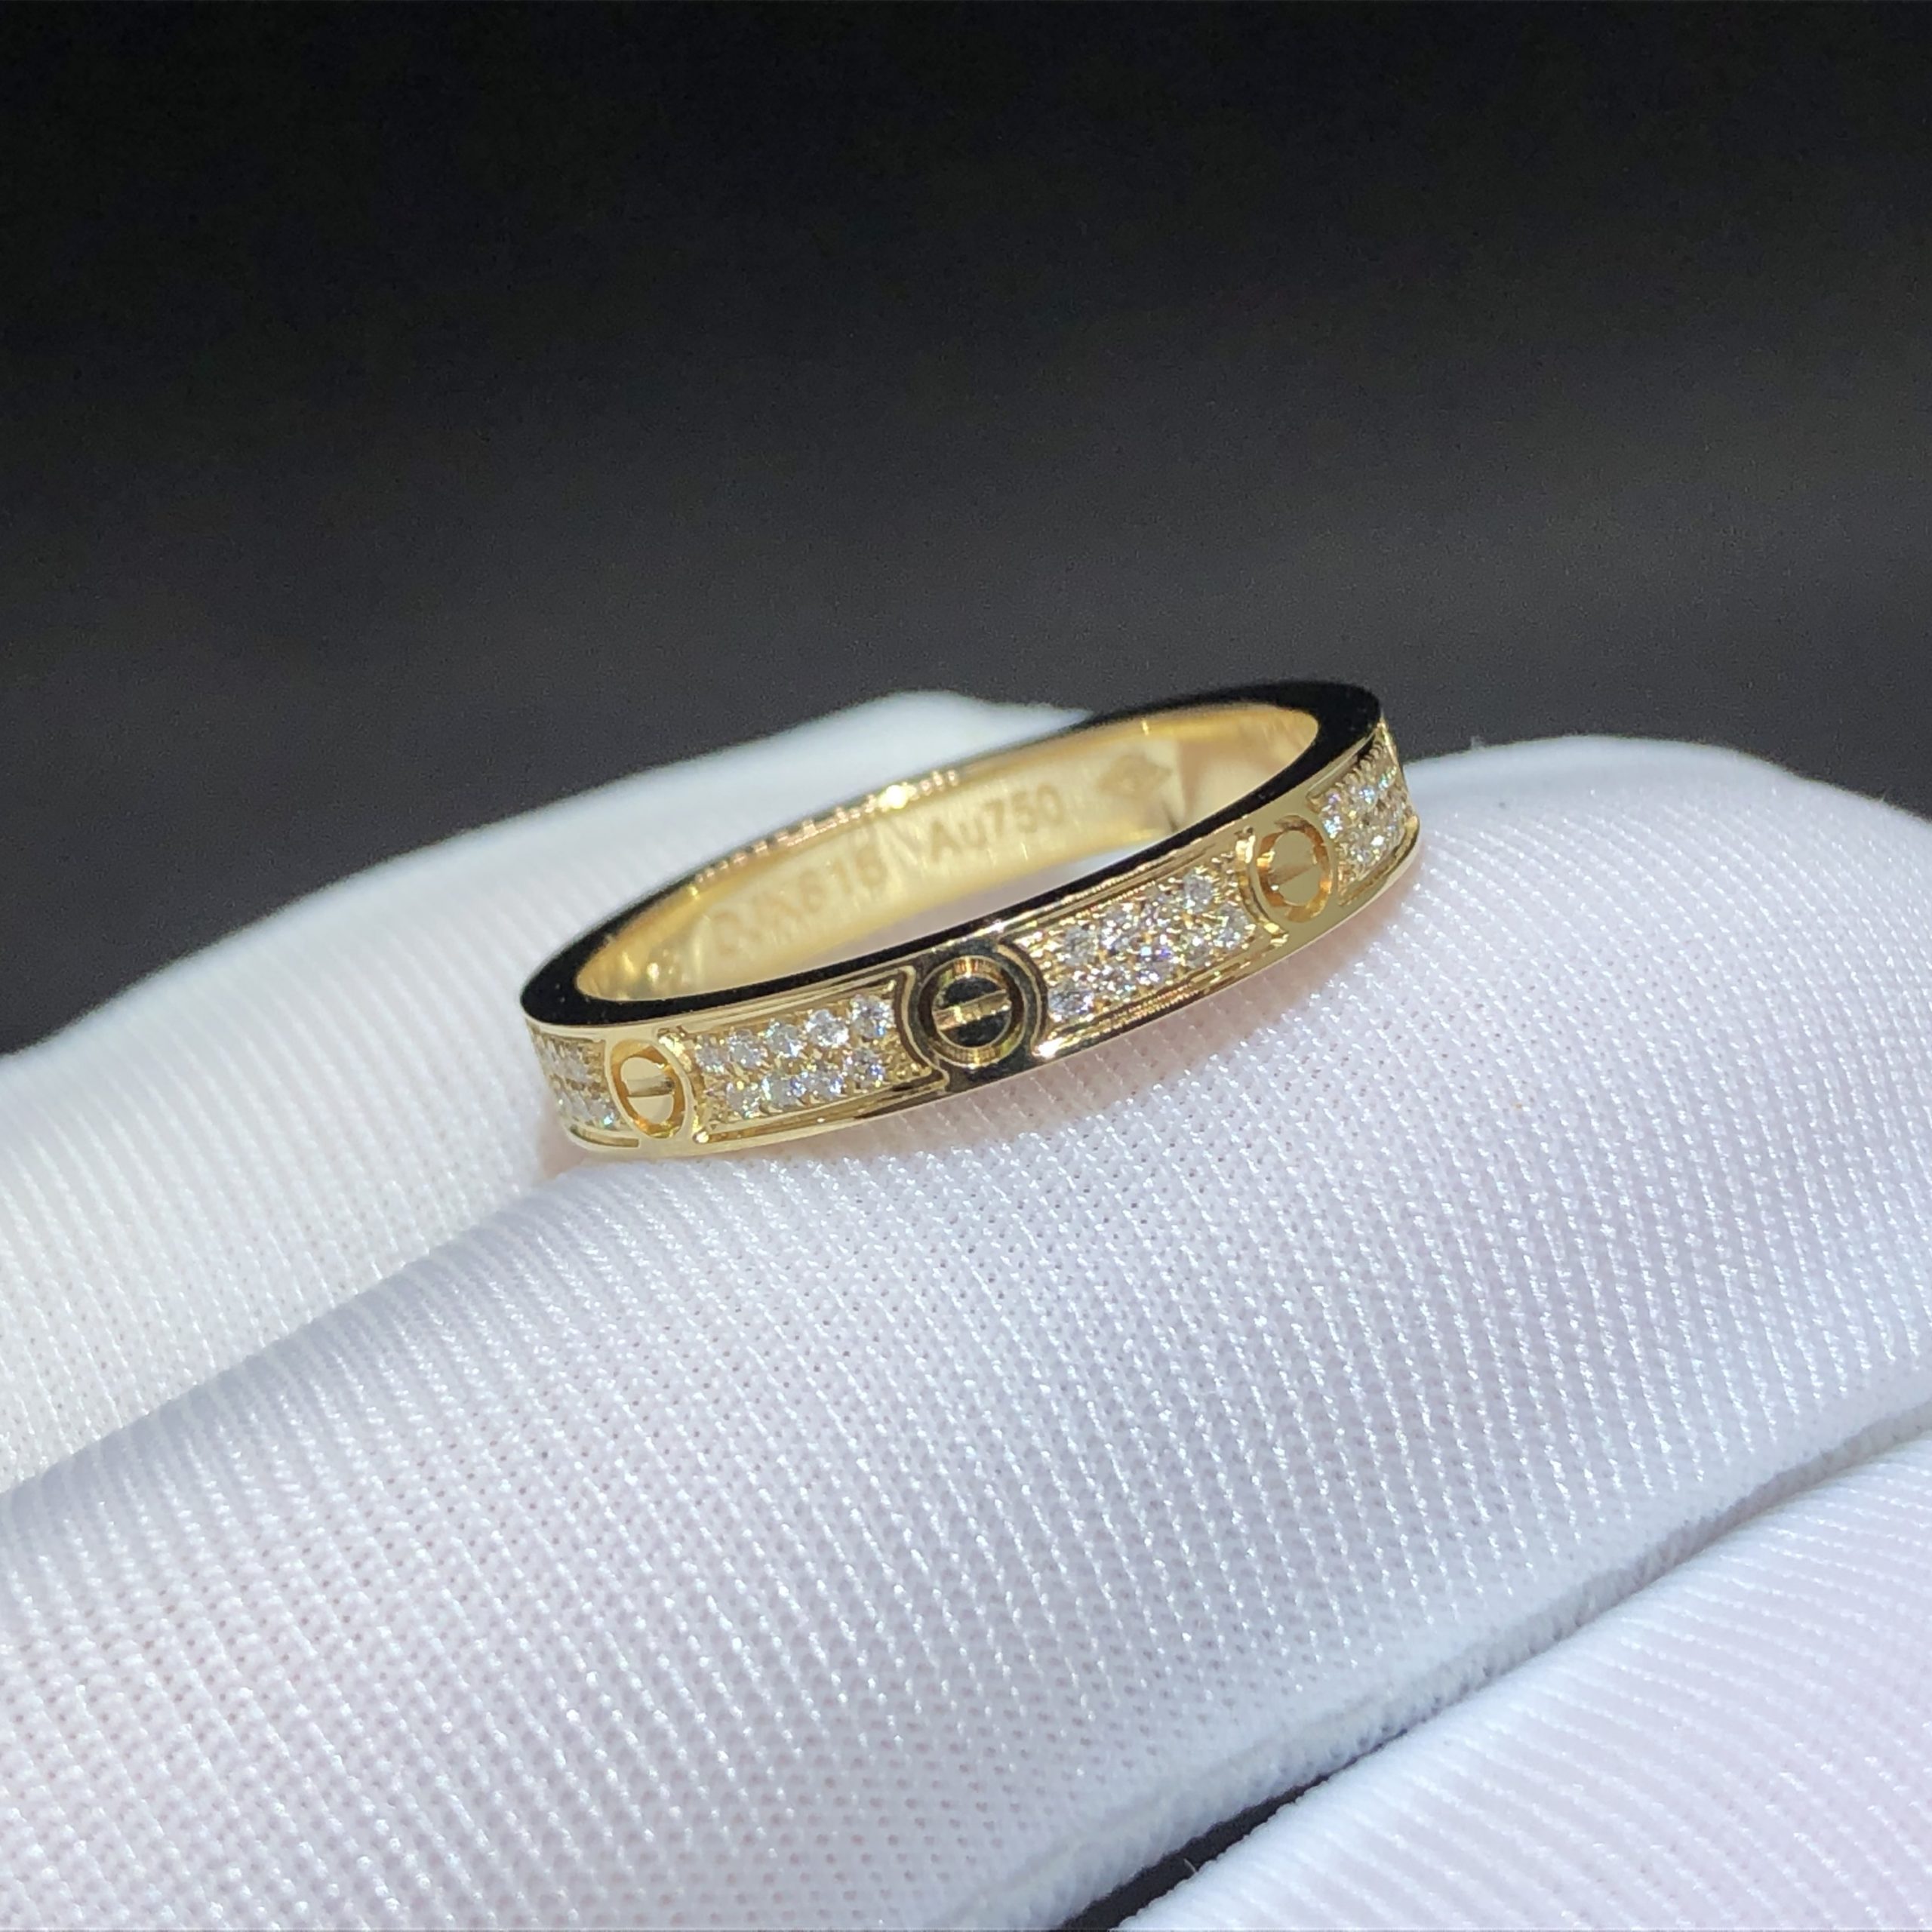 Cartier Love Ring Custom Made in 18K Yellow Gold and Diamonds Paved,Small Model